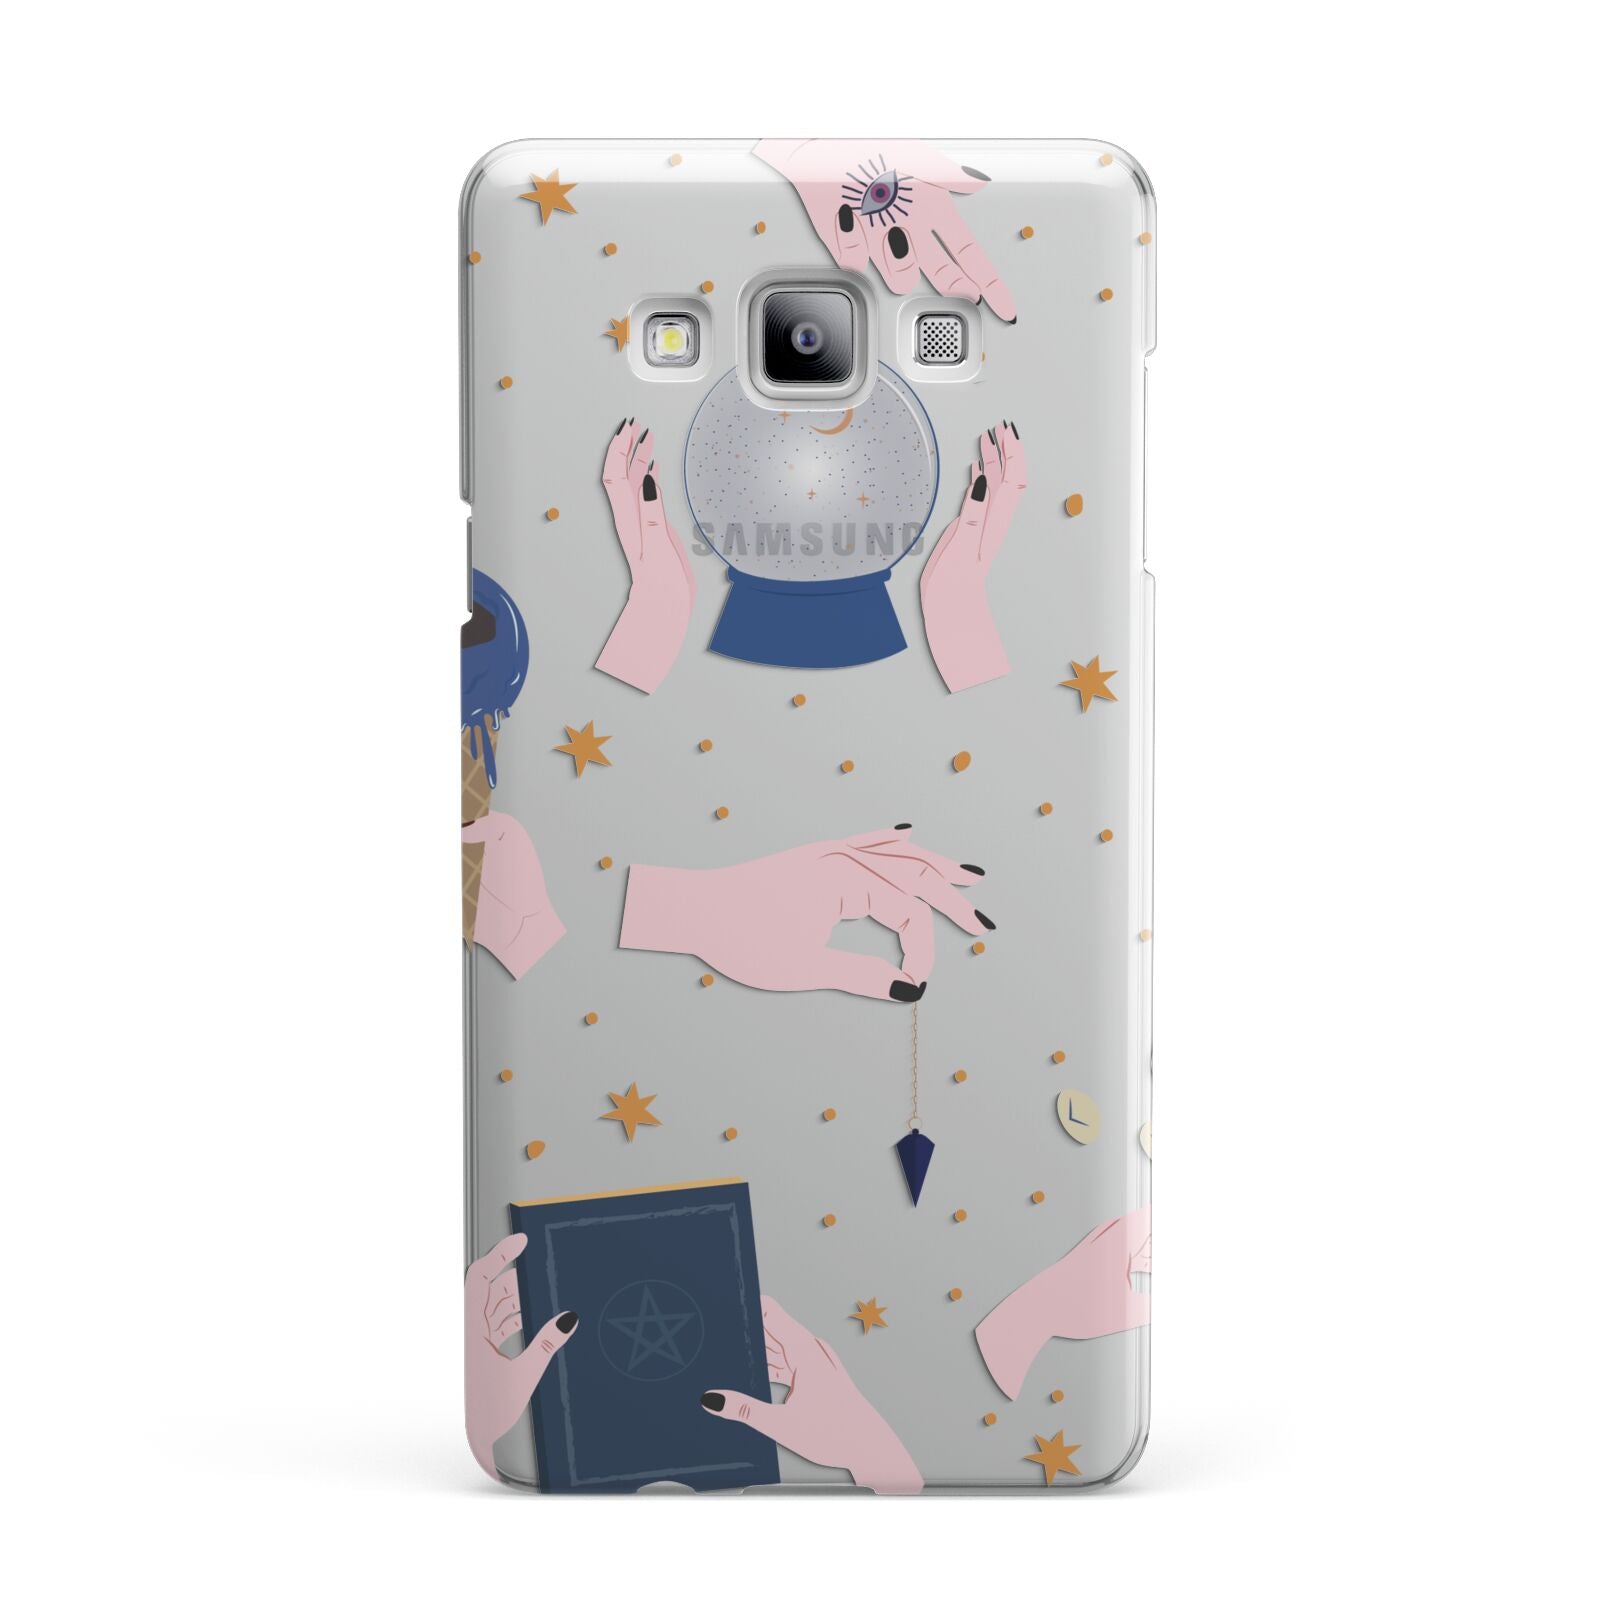 Clairvoyant Witches Hands Samsung Galaxy A7 2015 Case